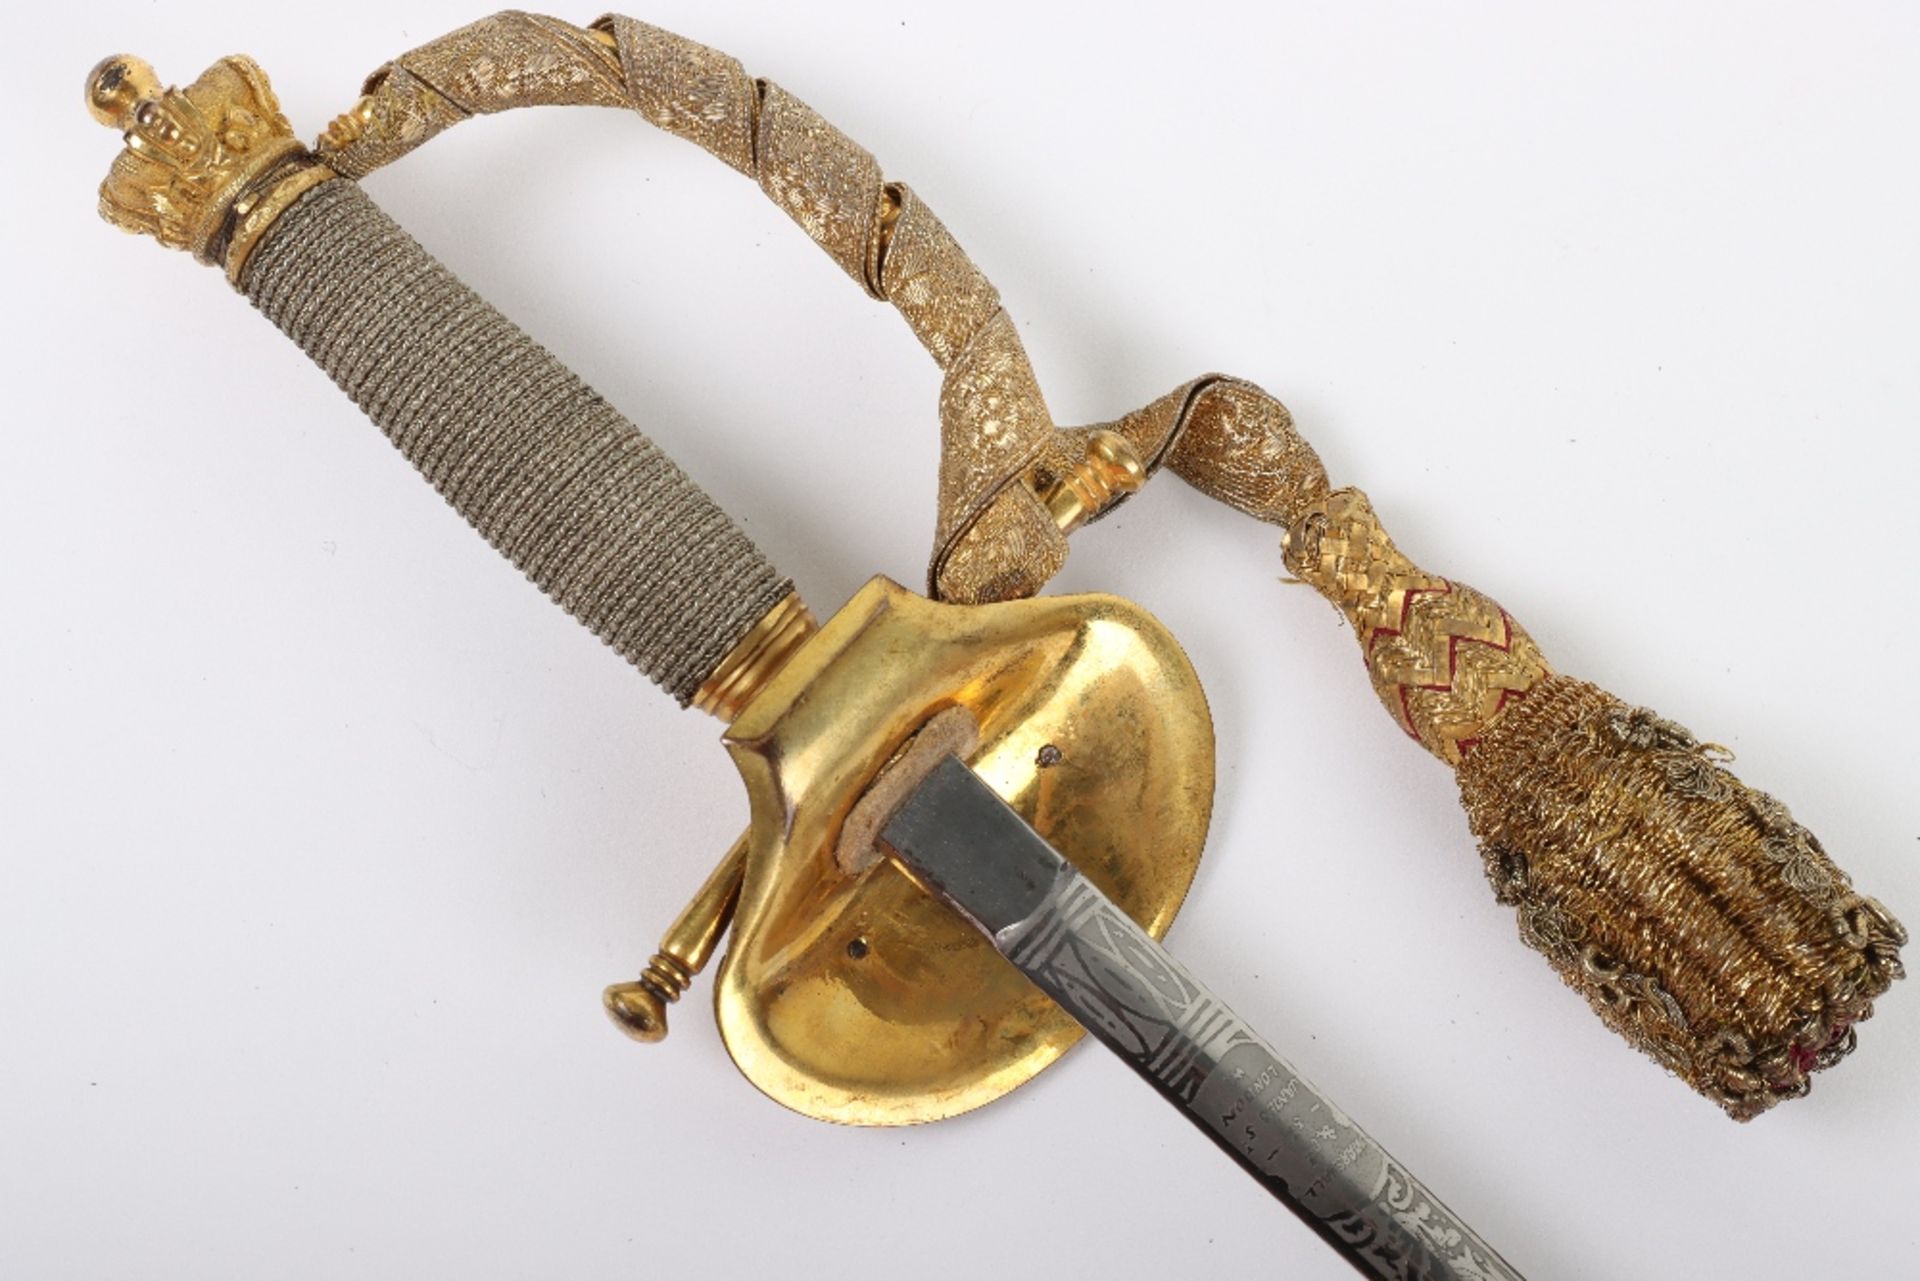 Edward 7th Courtsword, Embroidered Belt & Hanger, Cased Epaulettes for a Lord Lieutenant of an Engli - Image 9 of 38